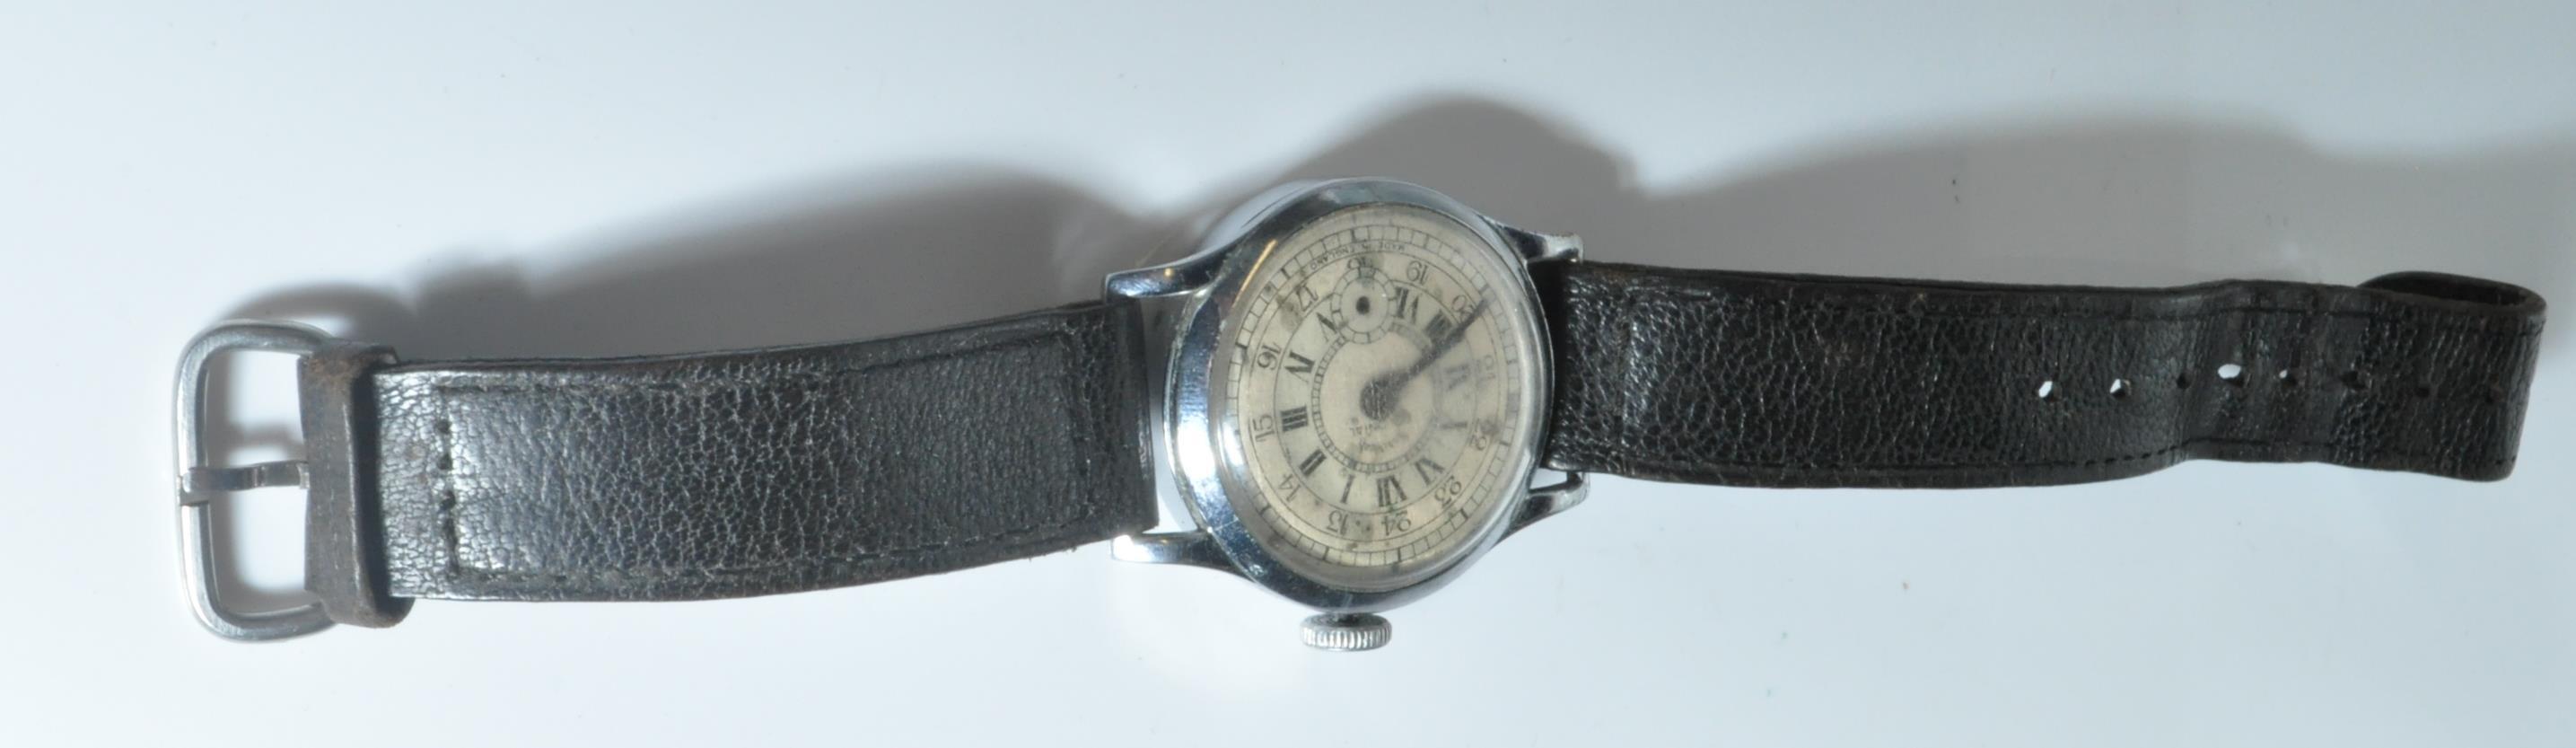 MID 20TH CENTURY SERVICES COLONIAL GENTLEMEN'S WRISTWATCH - Image 10 of 11